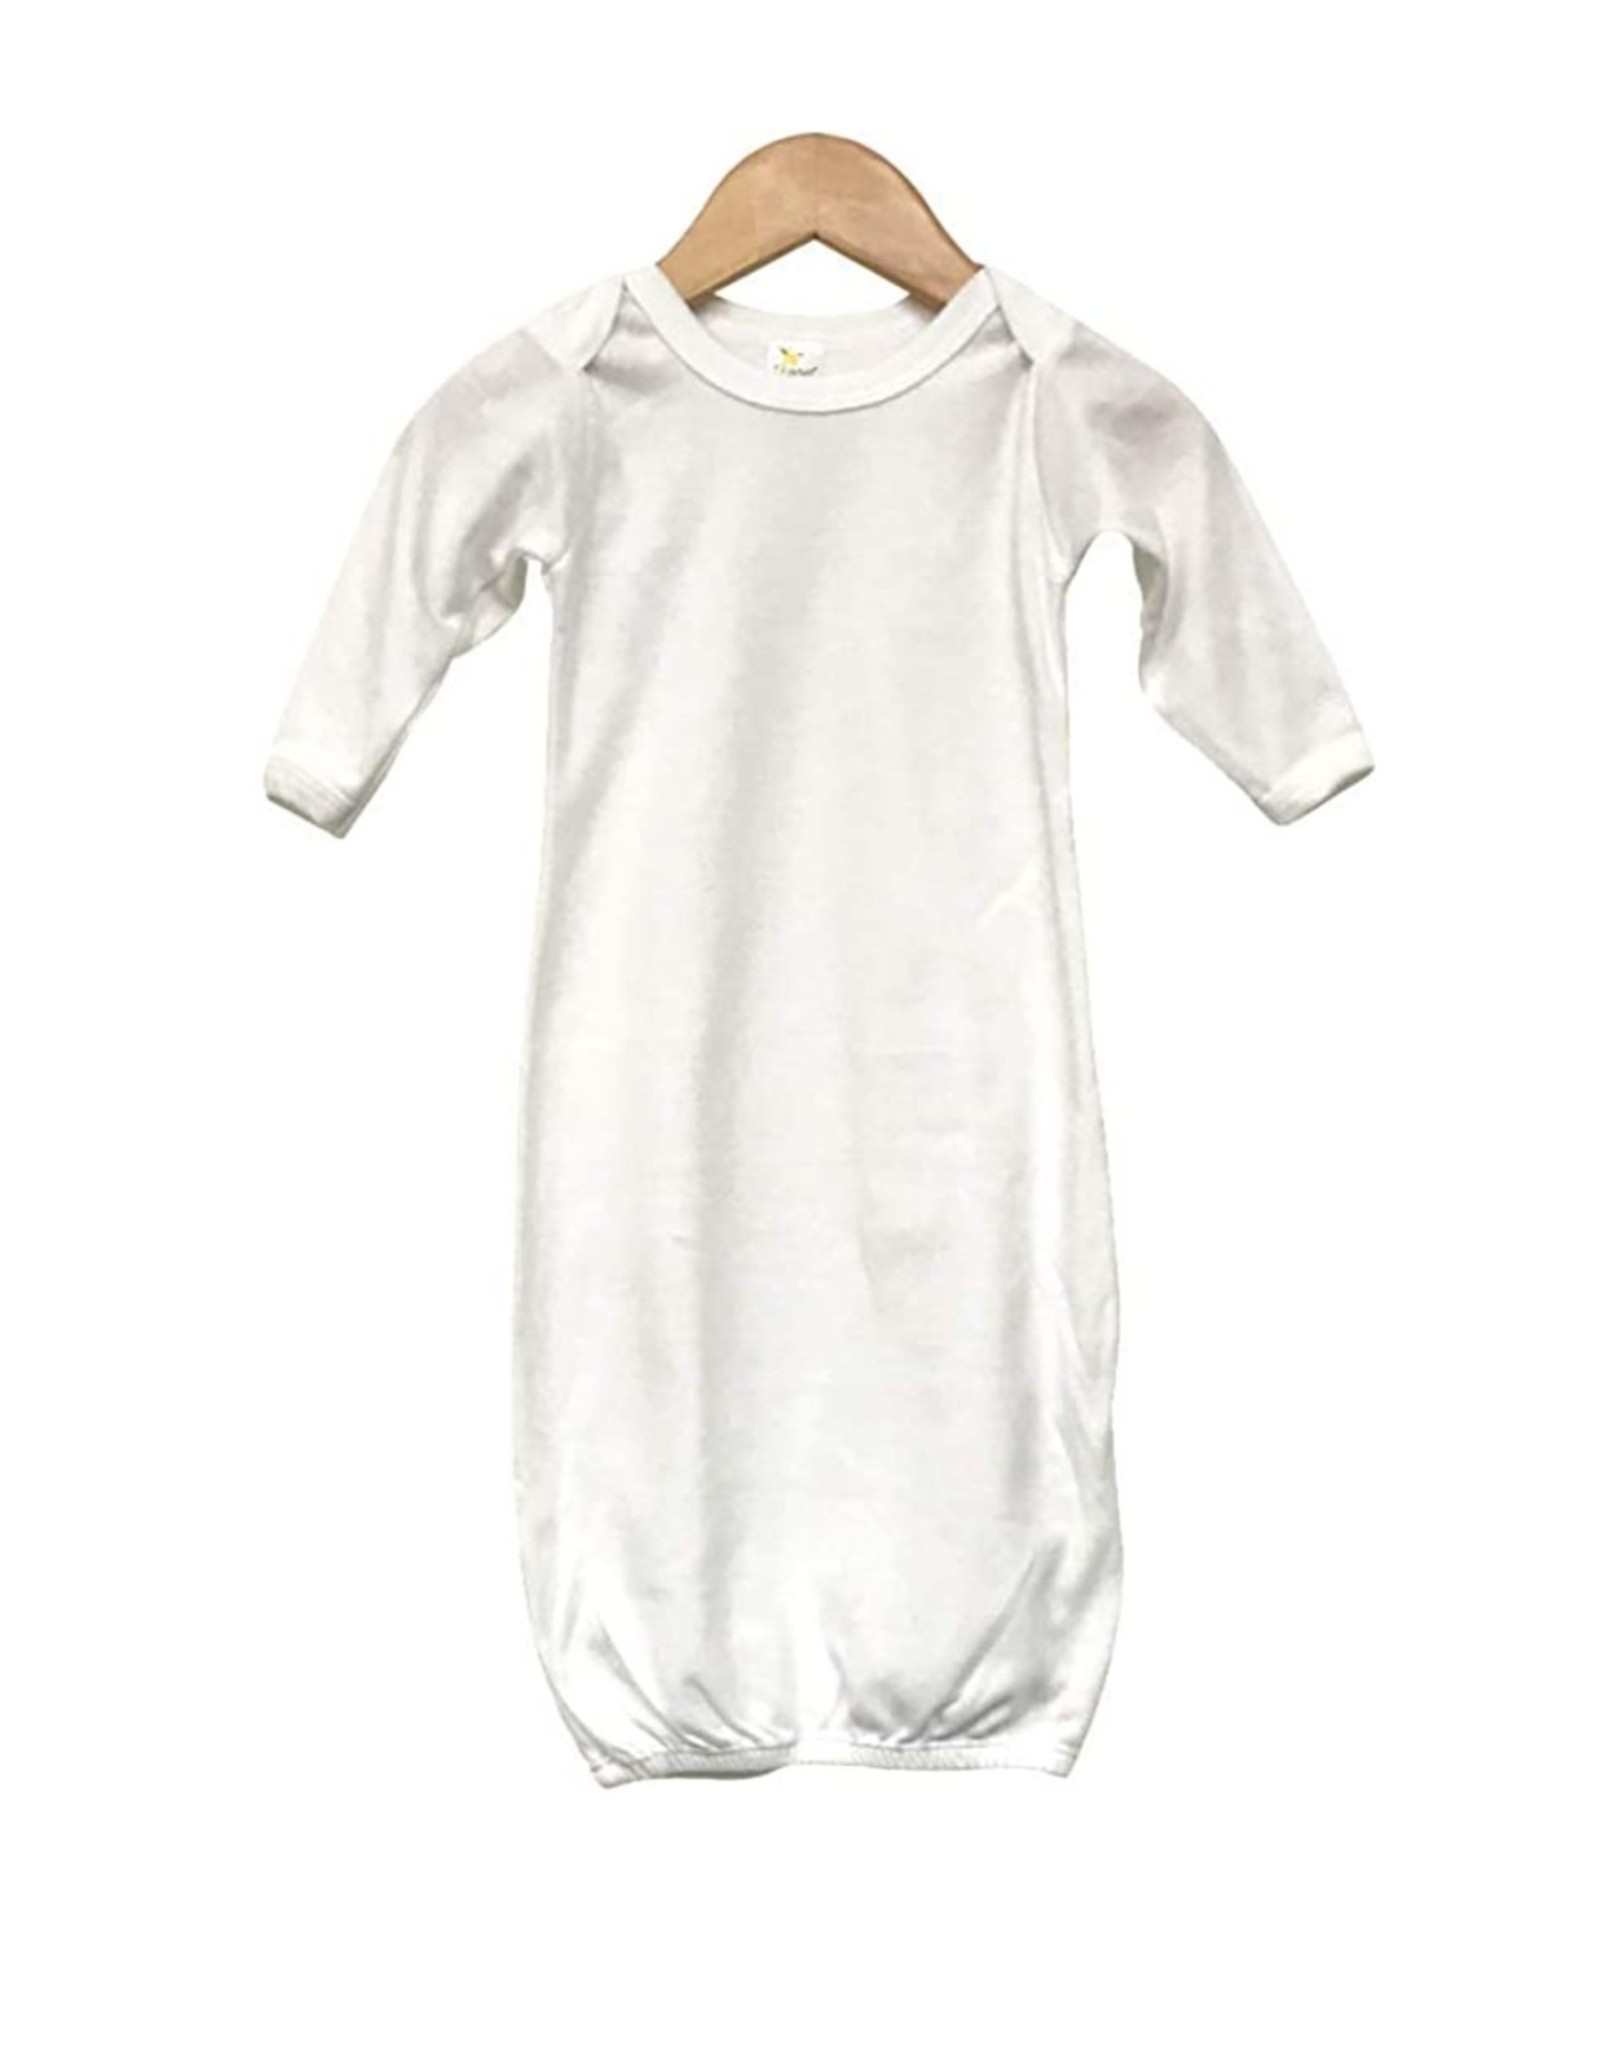 LG-Sublimation Baby Gown (0-3M) White